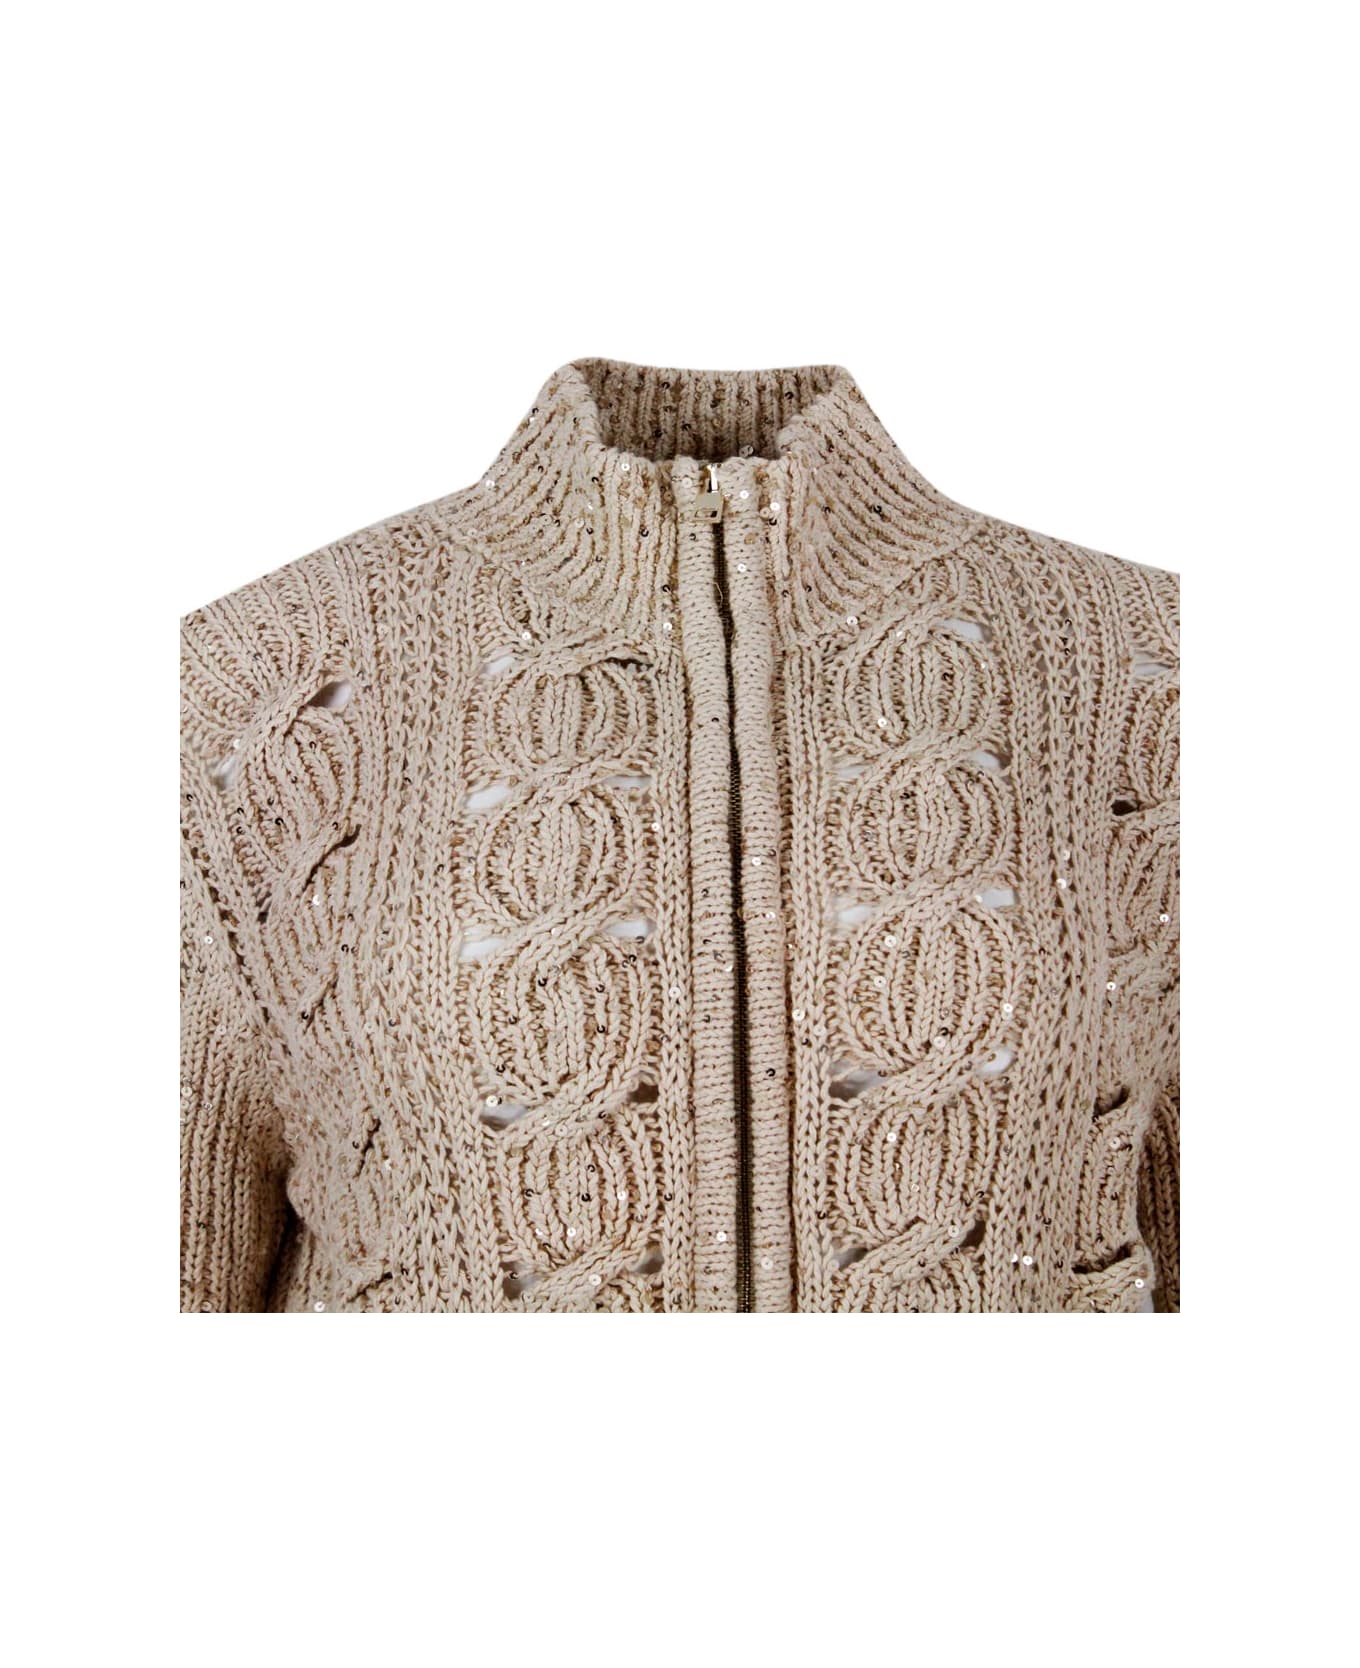 Lorena Antoniazzi Long-sleeved Full-zip Cardigan Sweater In Cotton Thread With Braided Work Embellished With Applied Microsequins - Gold カーディガン